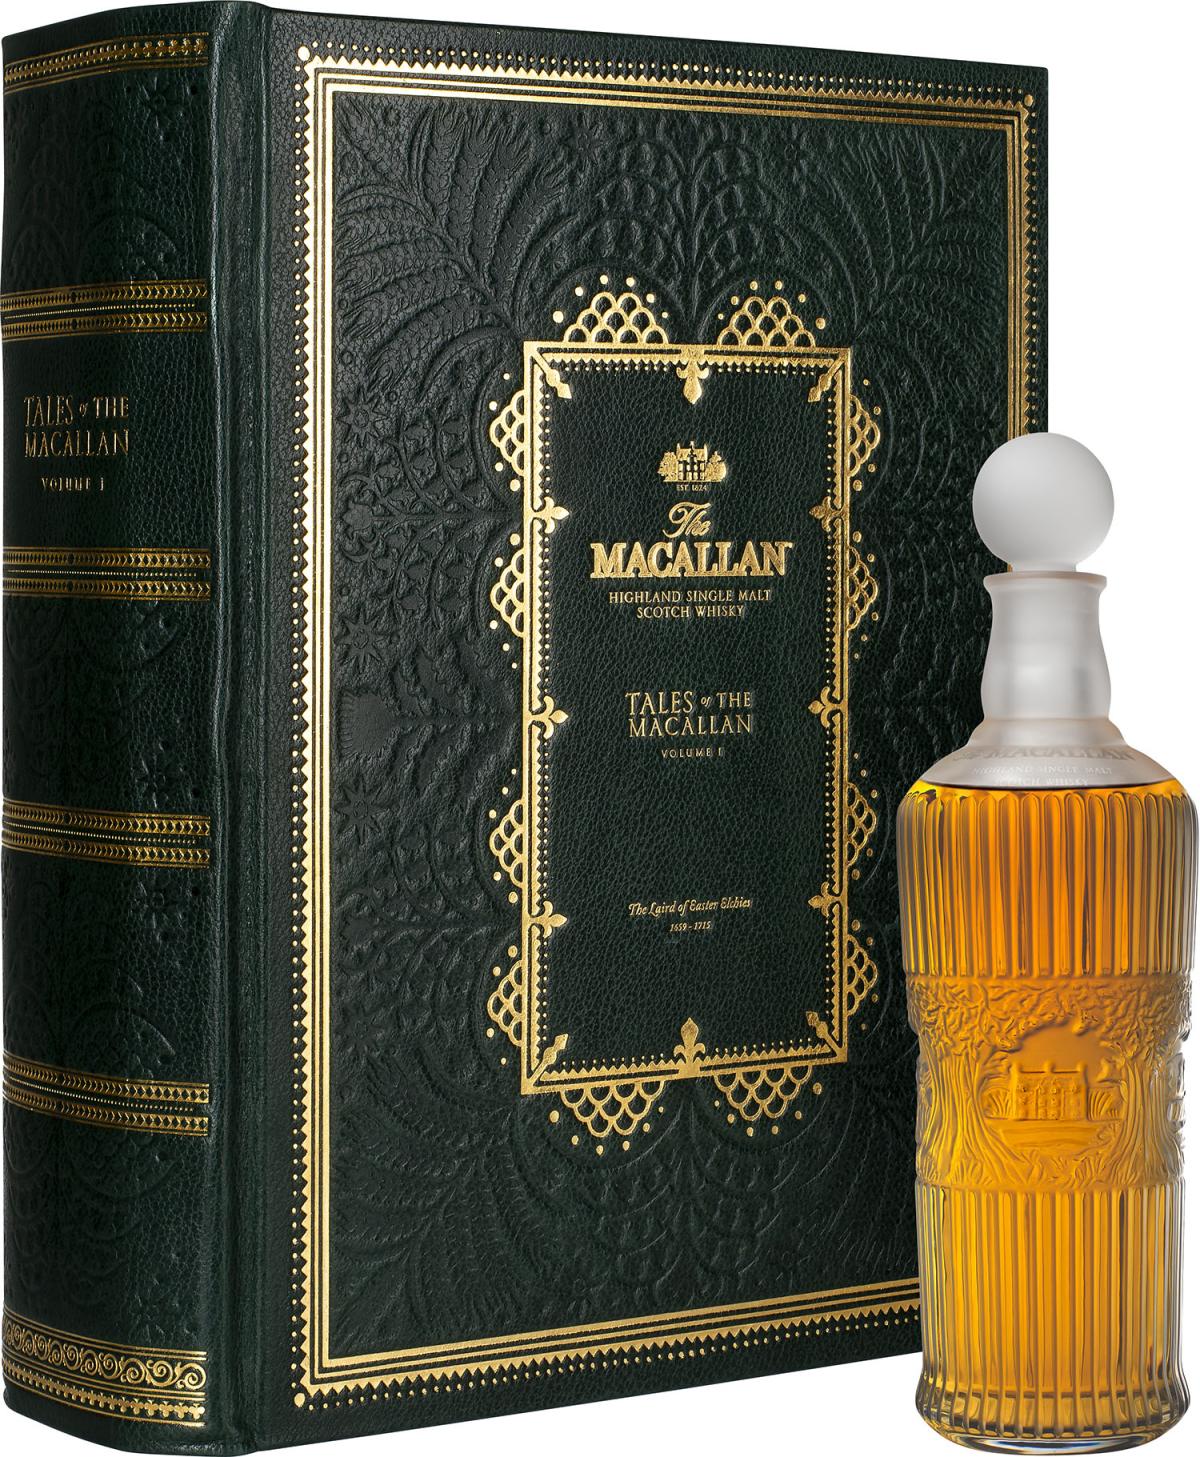 Tales of the Macallan dla Domu Whisky